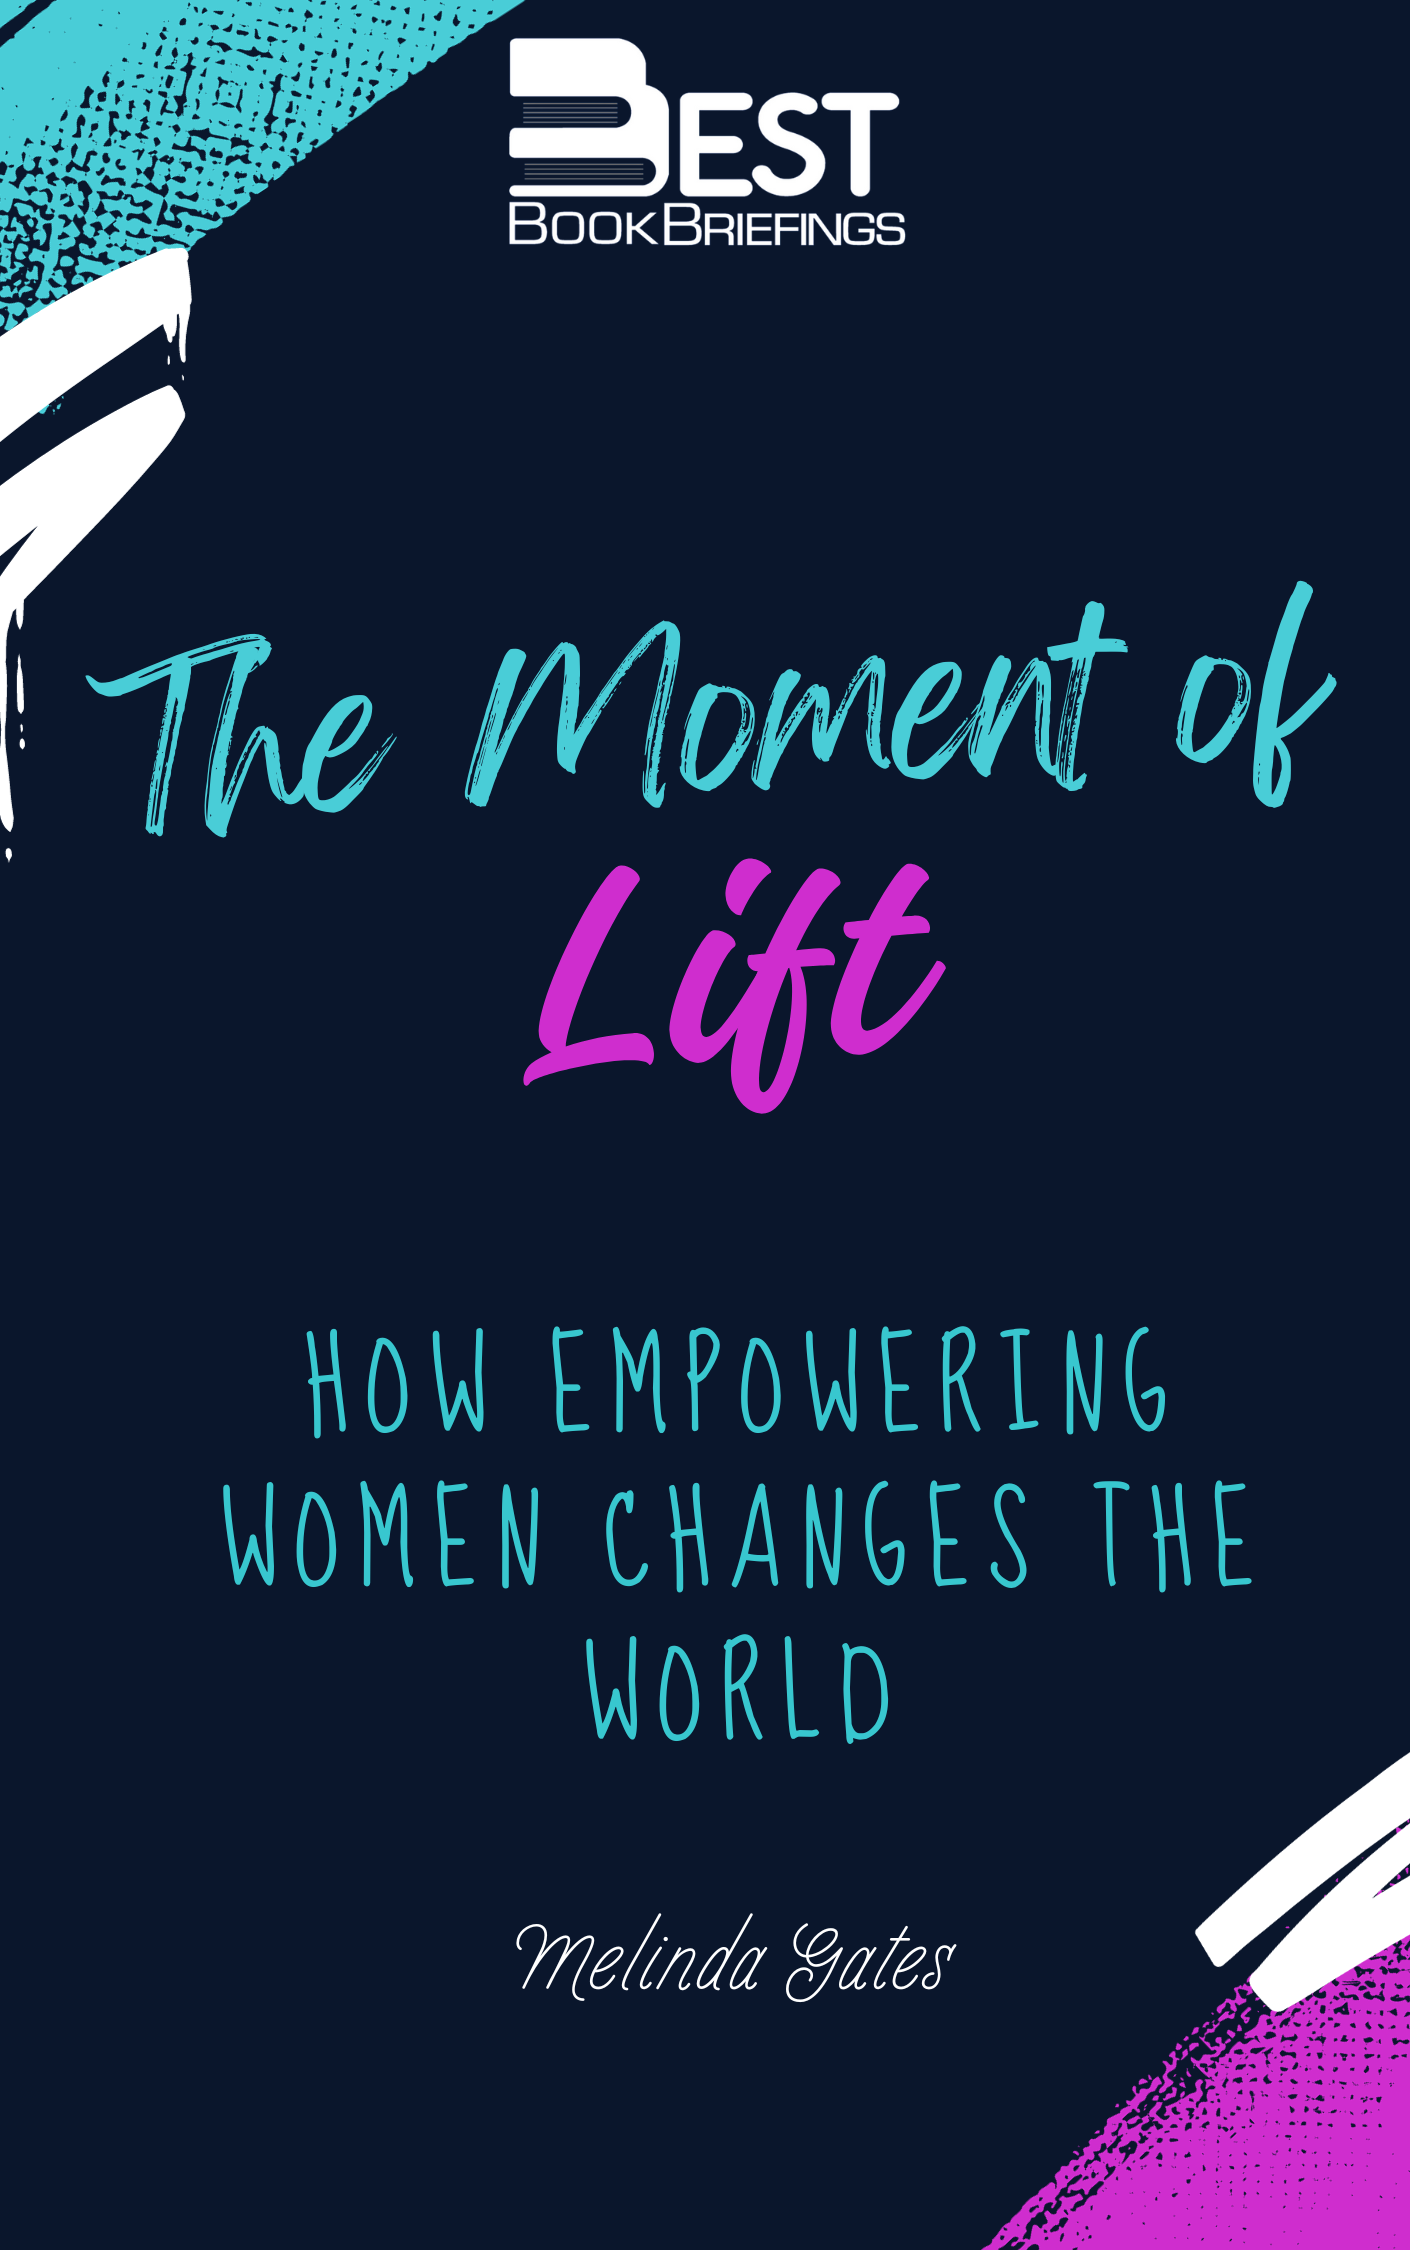  For the last twenty years, Melinda Gates has been on a mission to find solutions for people with the most urgent needs, wherever they live. Throughout this journey, one thing has become increasingly clear to her: If you want to lift a society up, you need to stop keeping women 